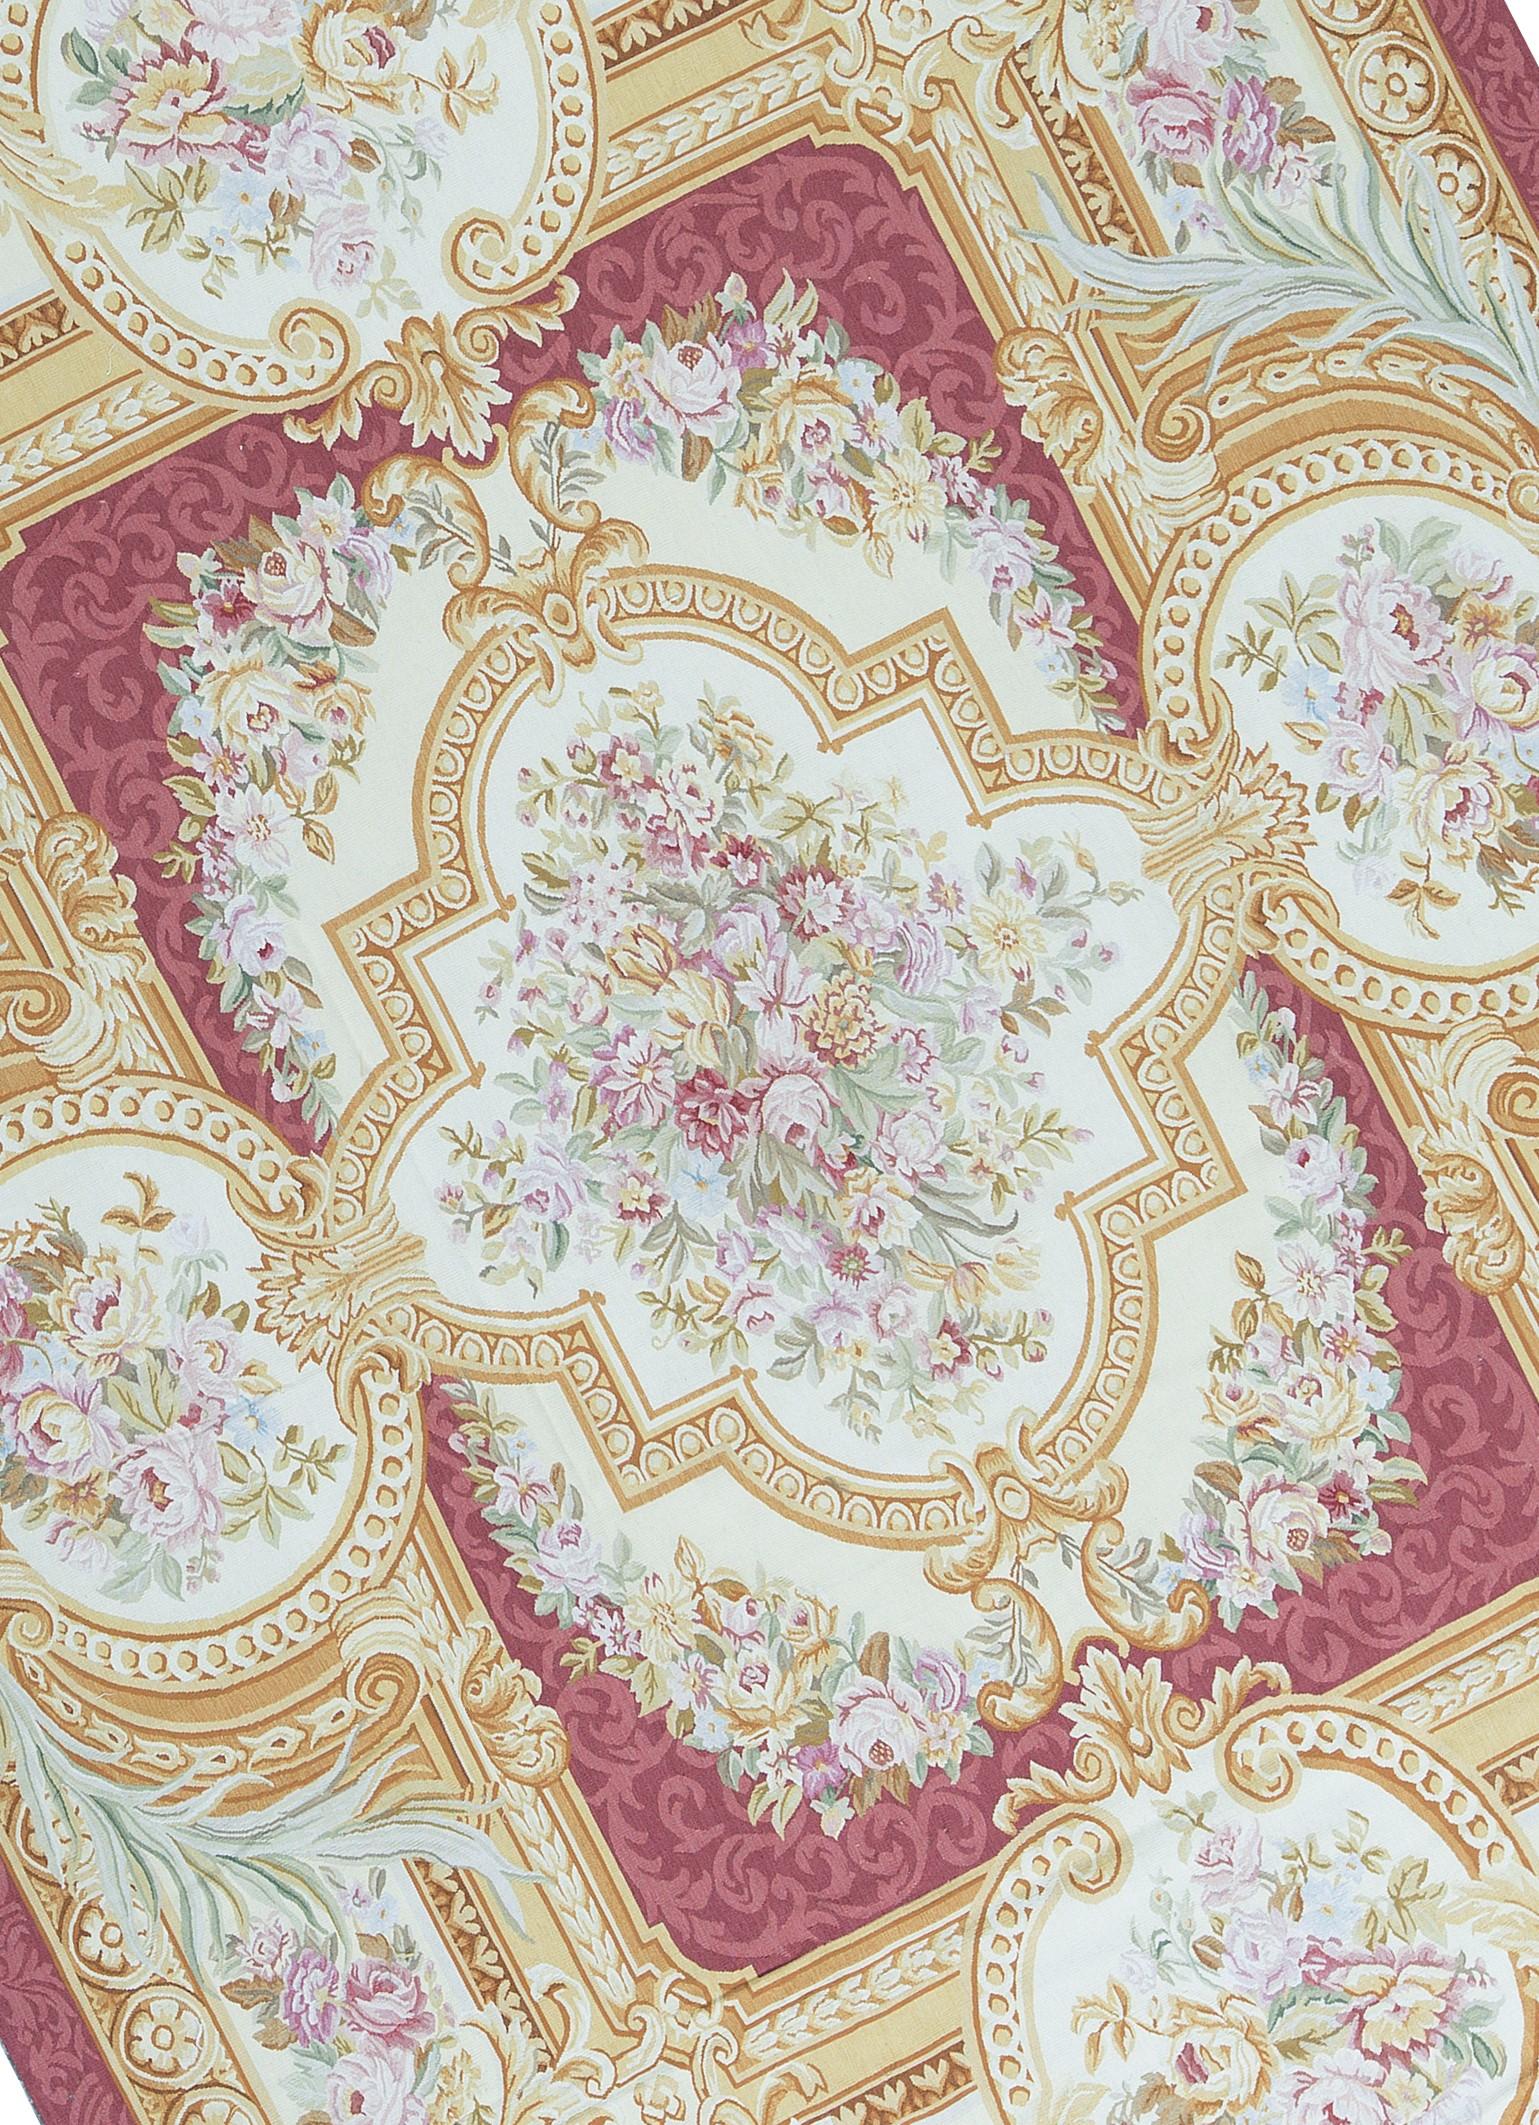 Handwoven recreation of the Classic French flat-weave Aubusson rugs that have been found in the finest homes and palaces since the late 17th century. Size: 8' 11'' x 12' 3''.